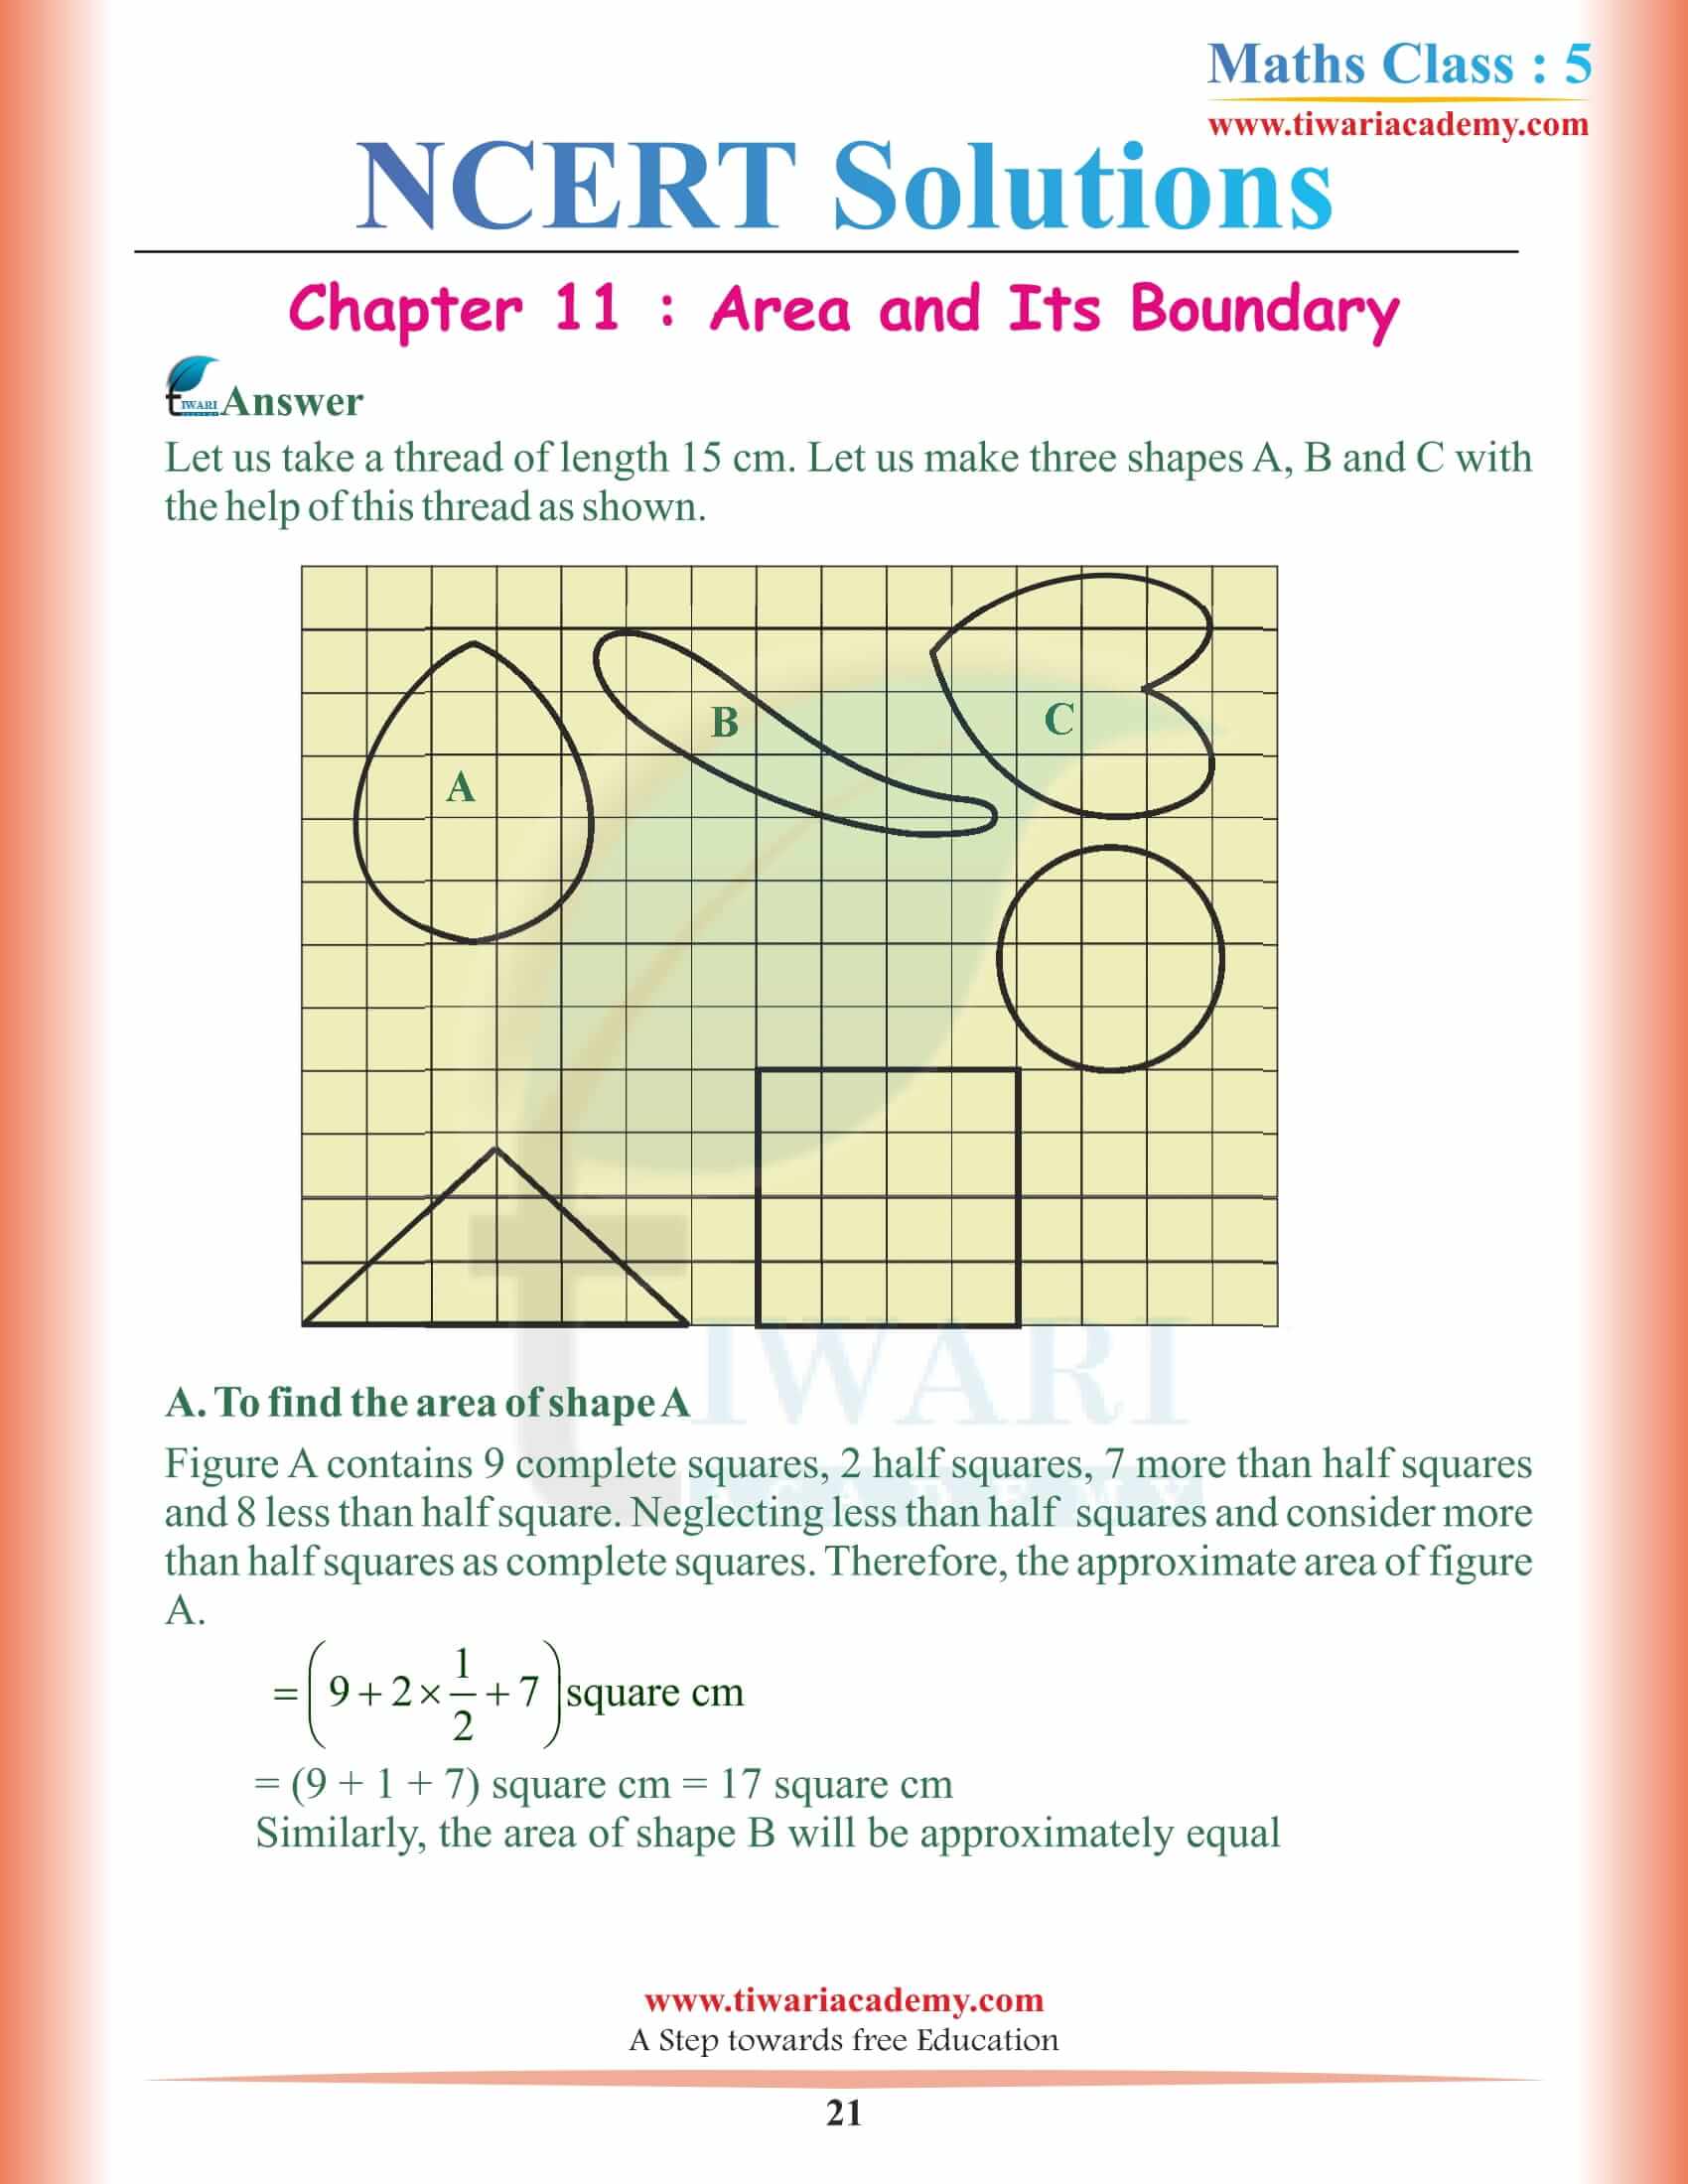 5th Math NCERT Chapter 11 Solutions